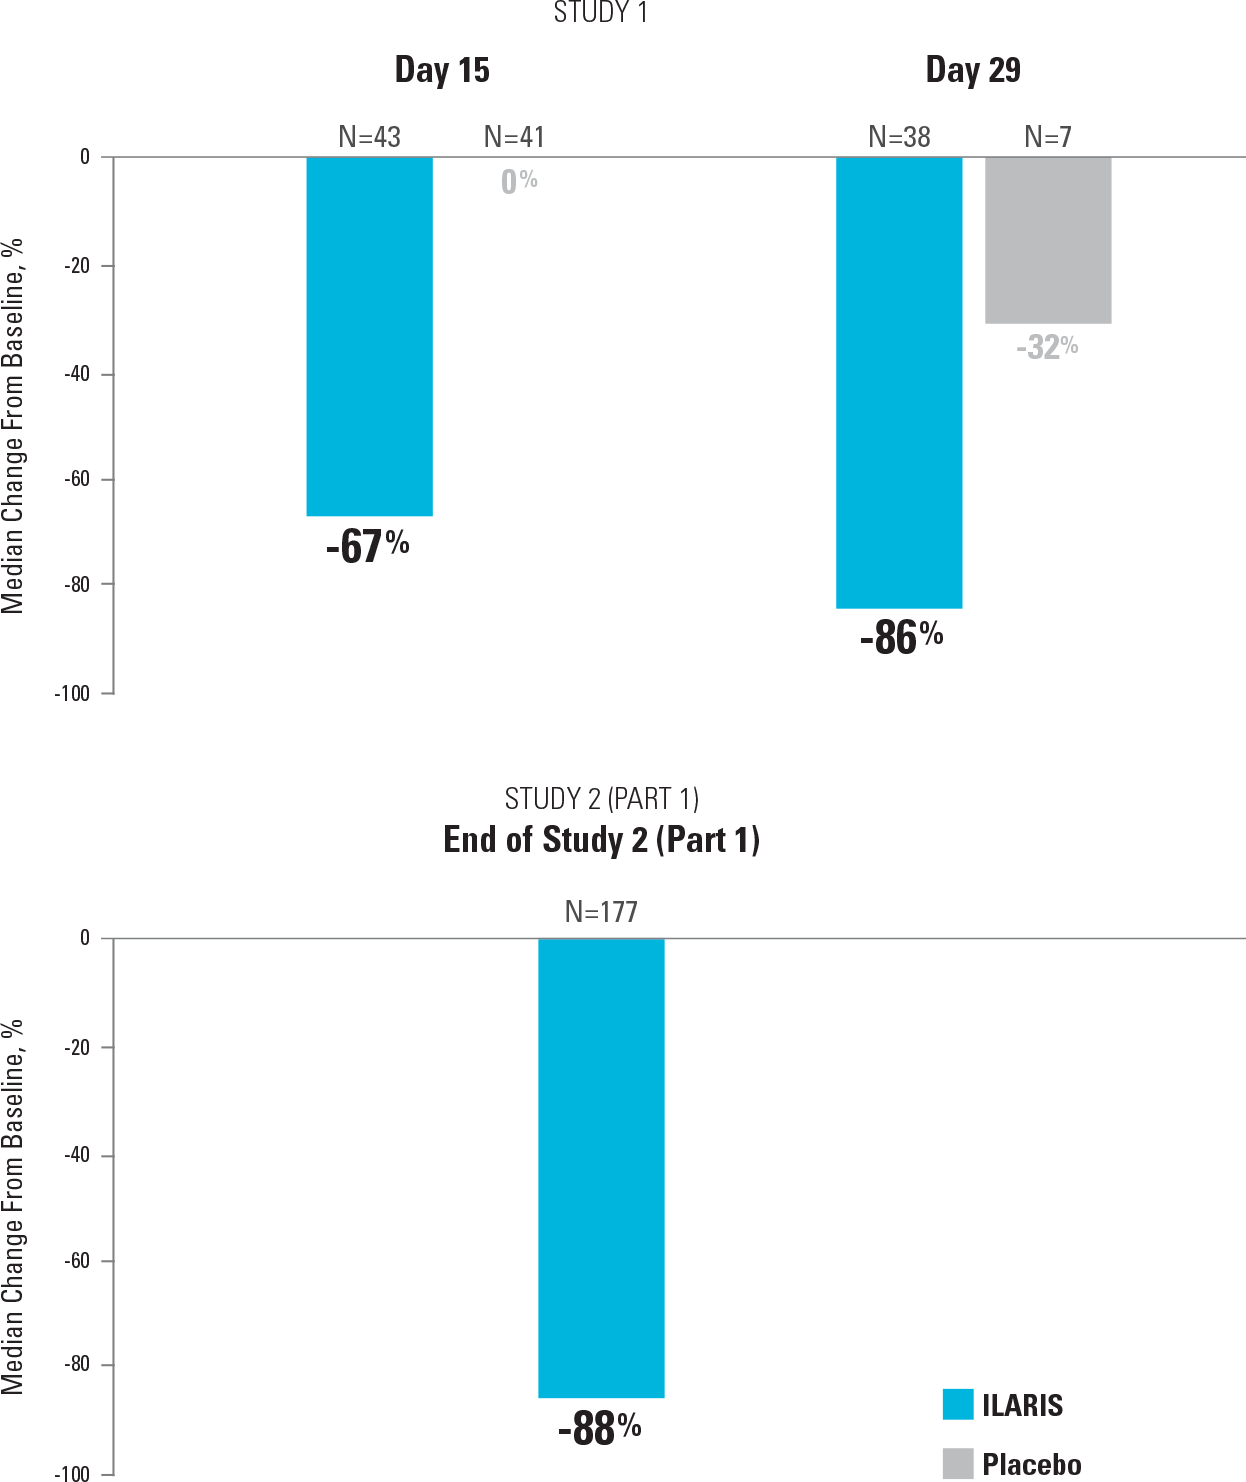 Graph depicting median reduction in number of active arthritic joints in study 1 and study 2, part 1 (ILARIS vs placebo)